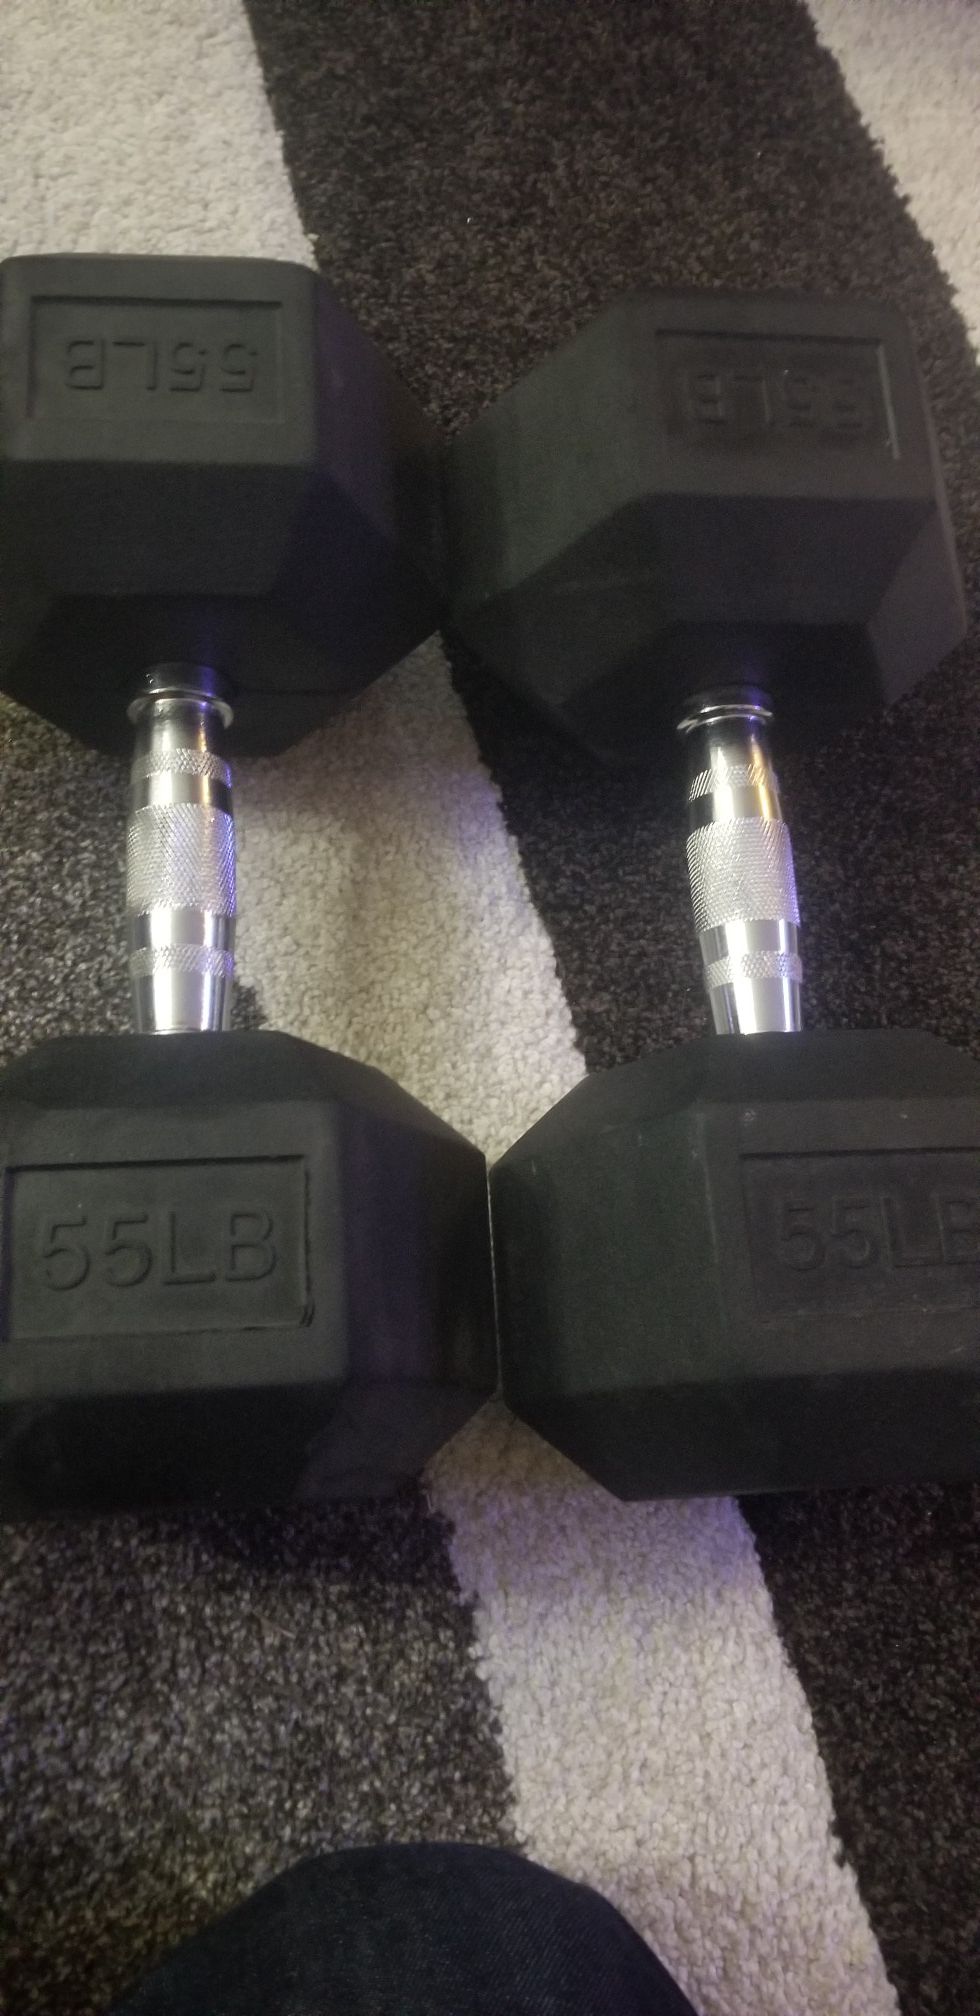 55lbs rubber hex dumbbells never used